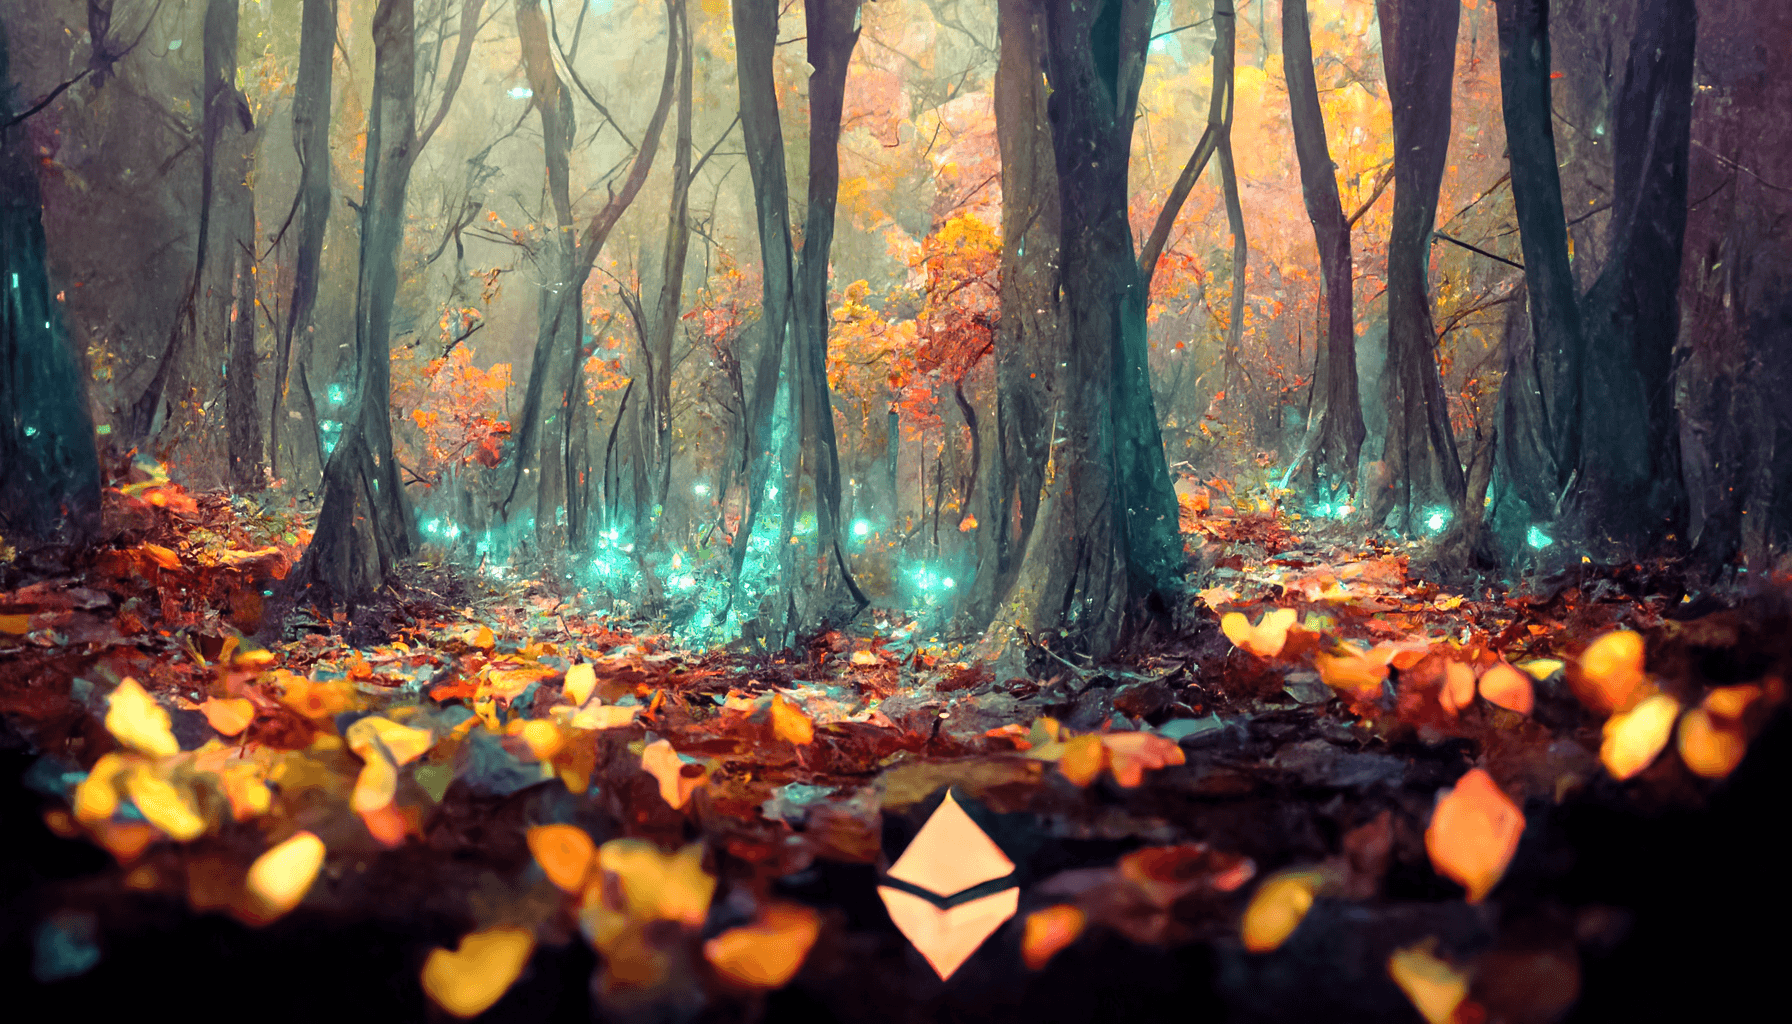 Ethereum Forest #4